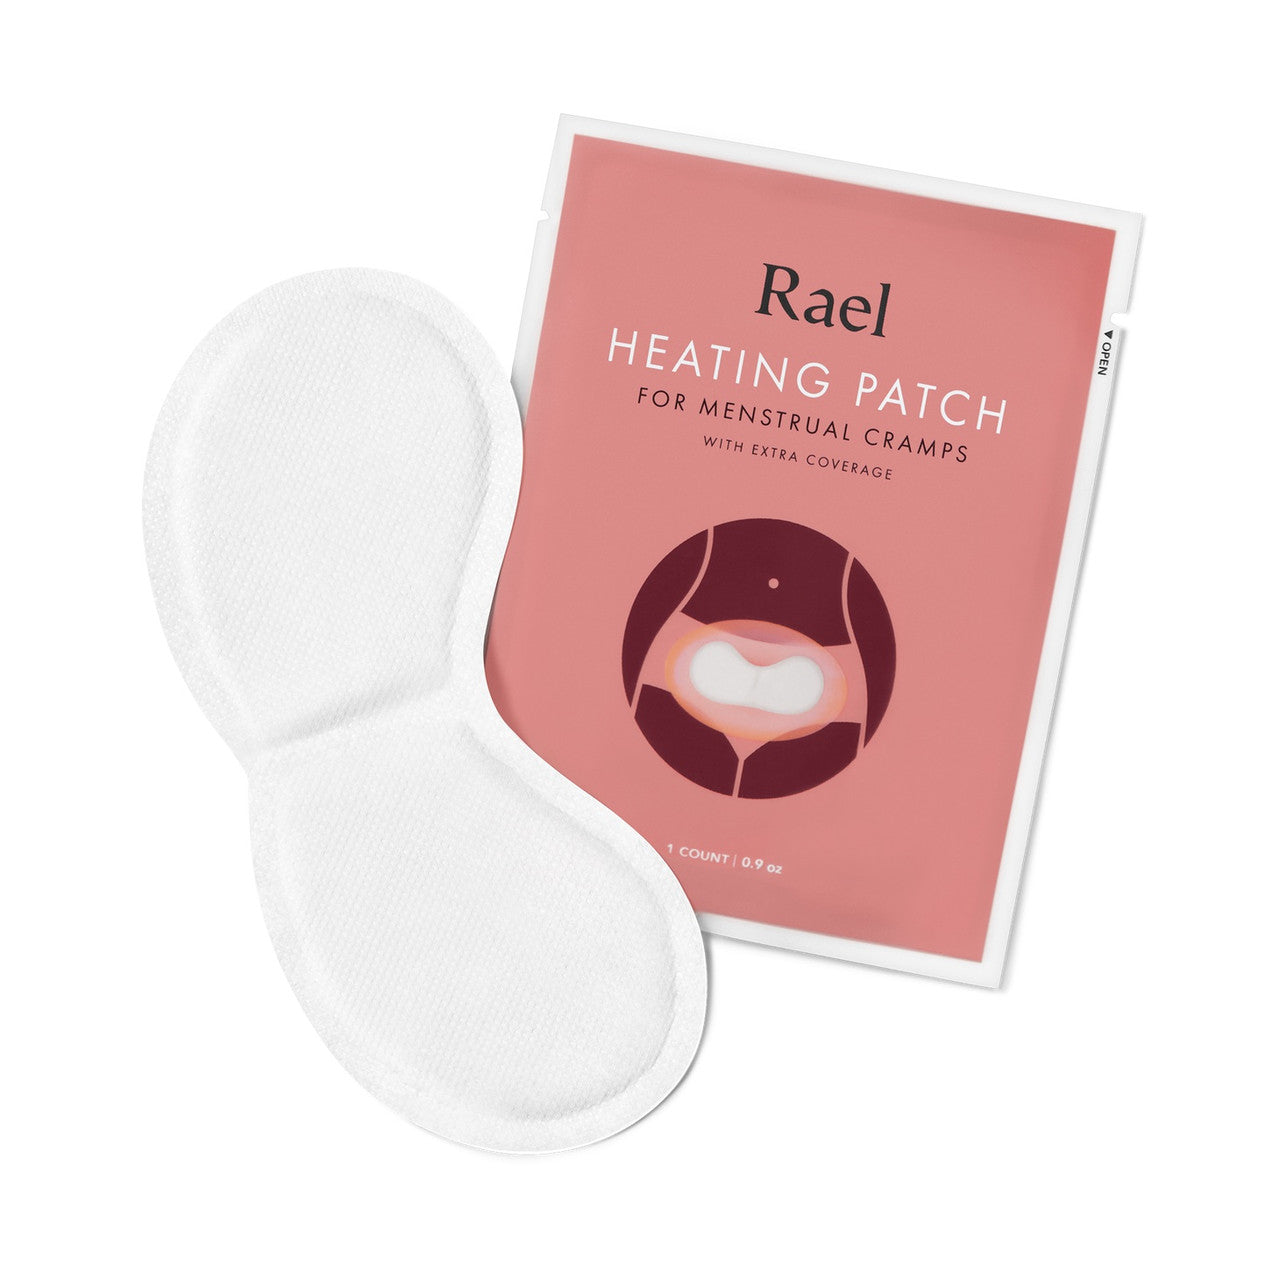 RAEL Heating Patch for Menstrual Cramps | 3 count